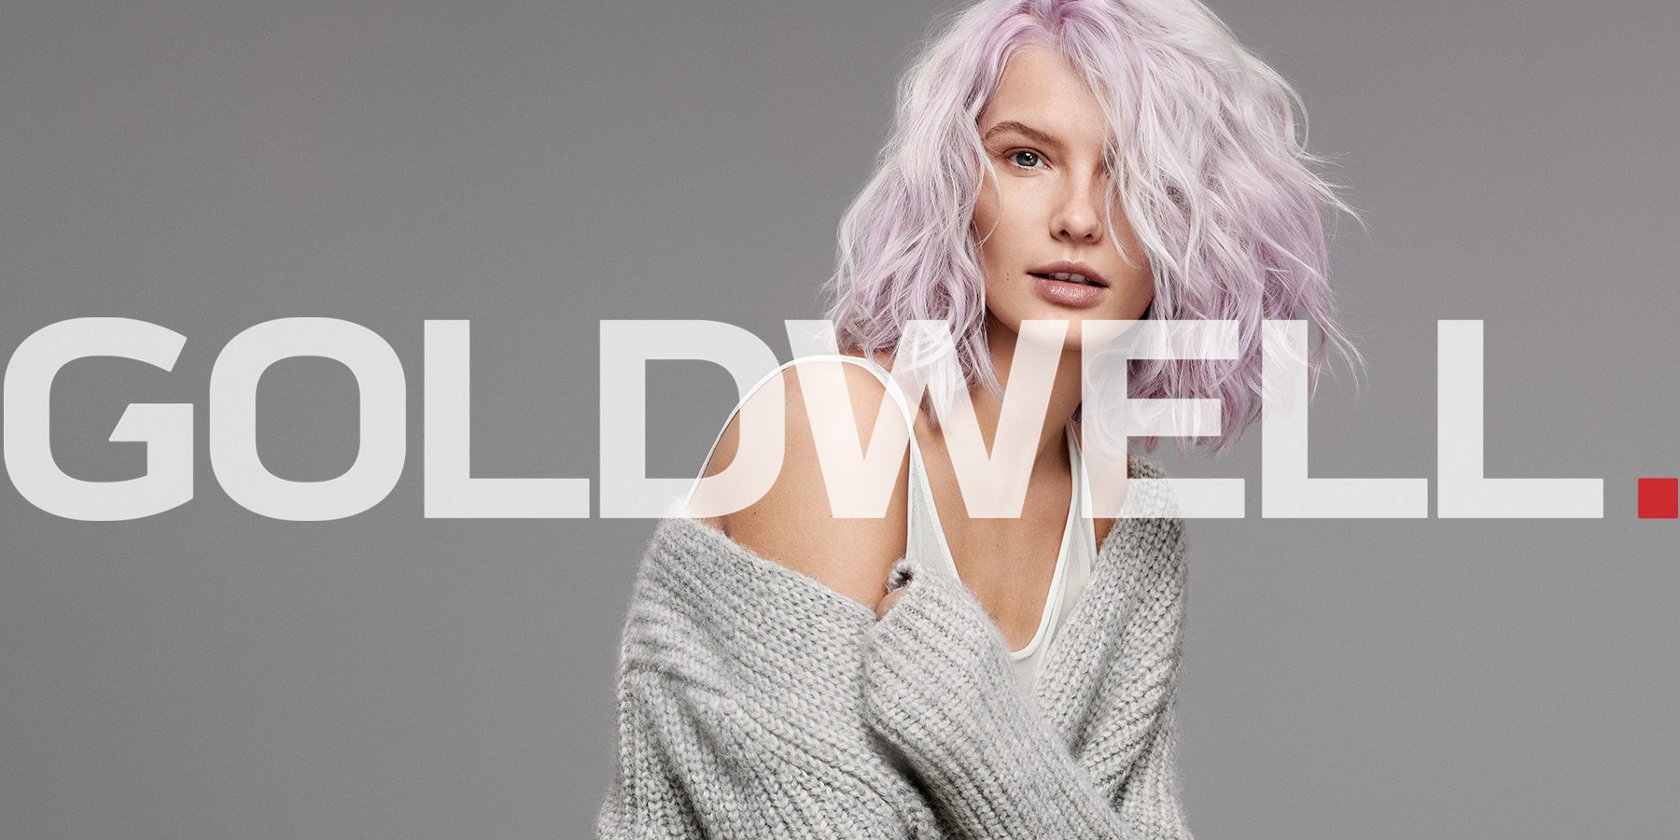 goldwell hair products in Hertfordshire buy online